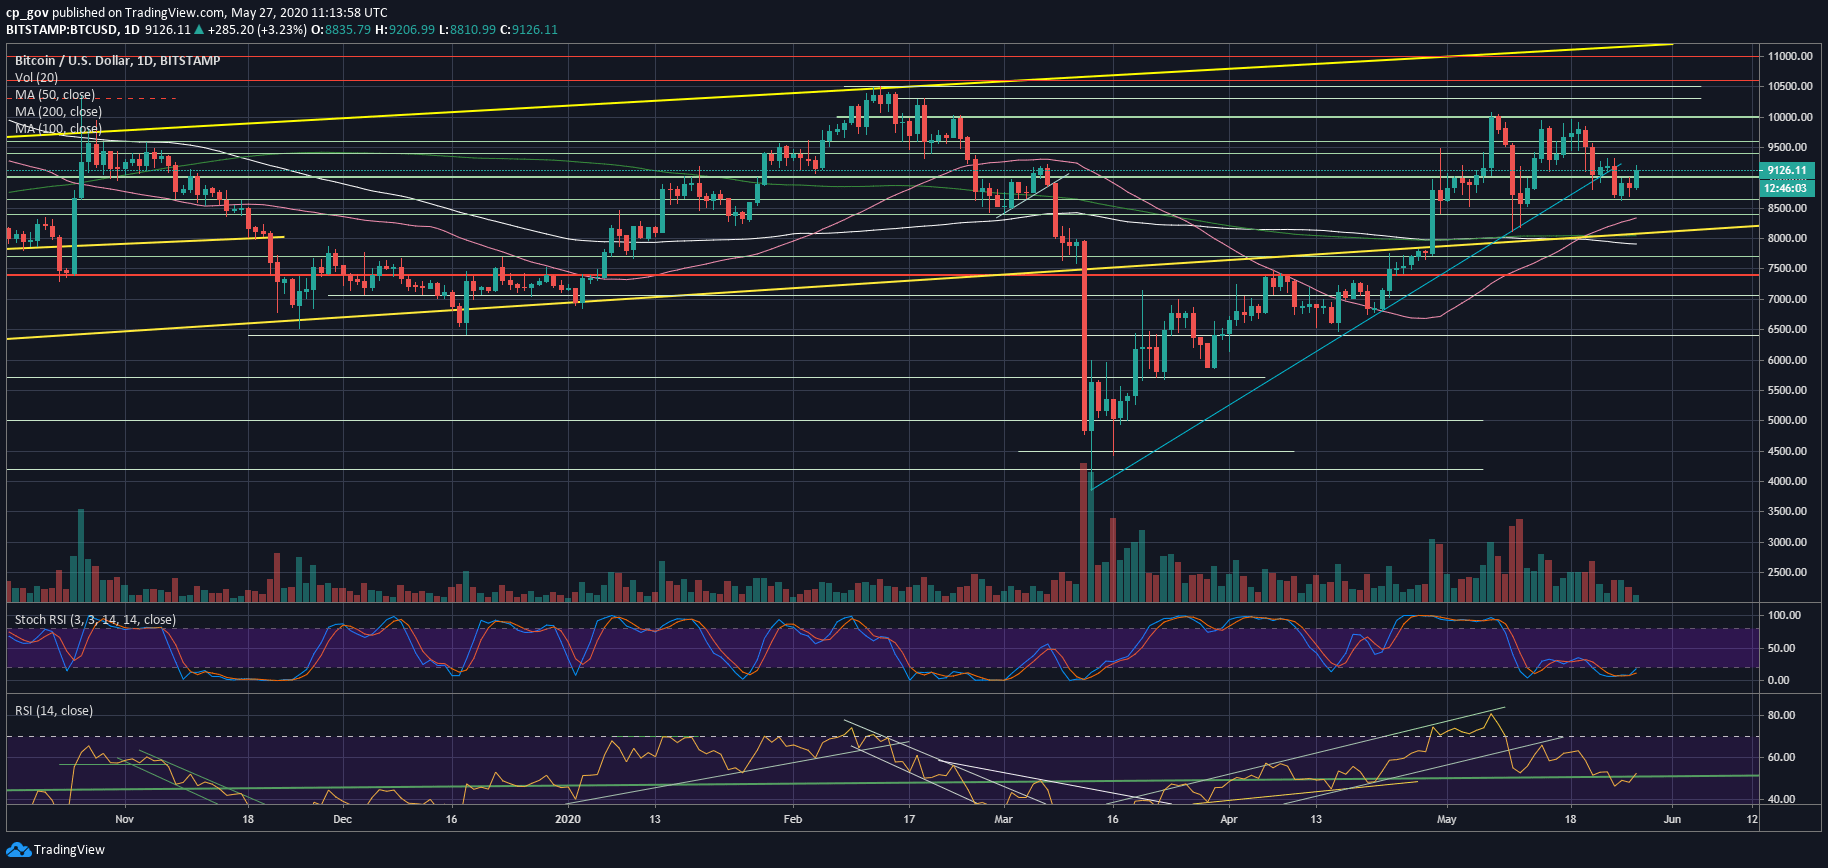 Bitcoin Breaks $9K After $400 Hourly Spike: Still Needs To Overcome Critical Resistance (BTC Price Analysis)